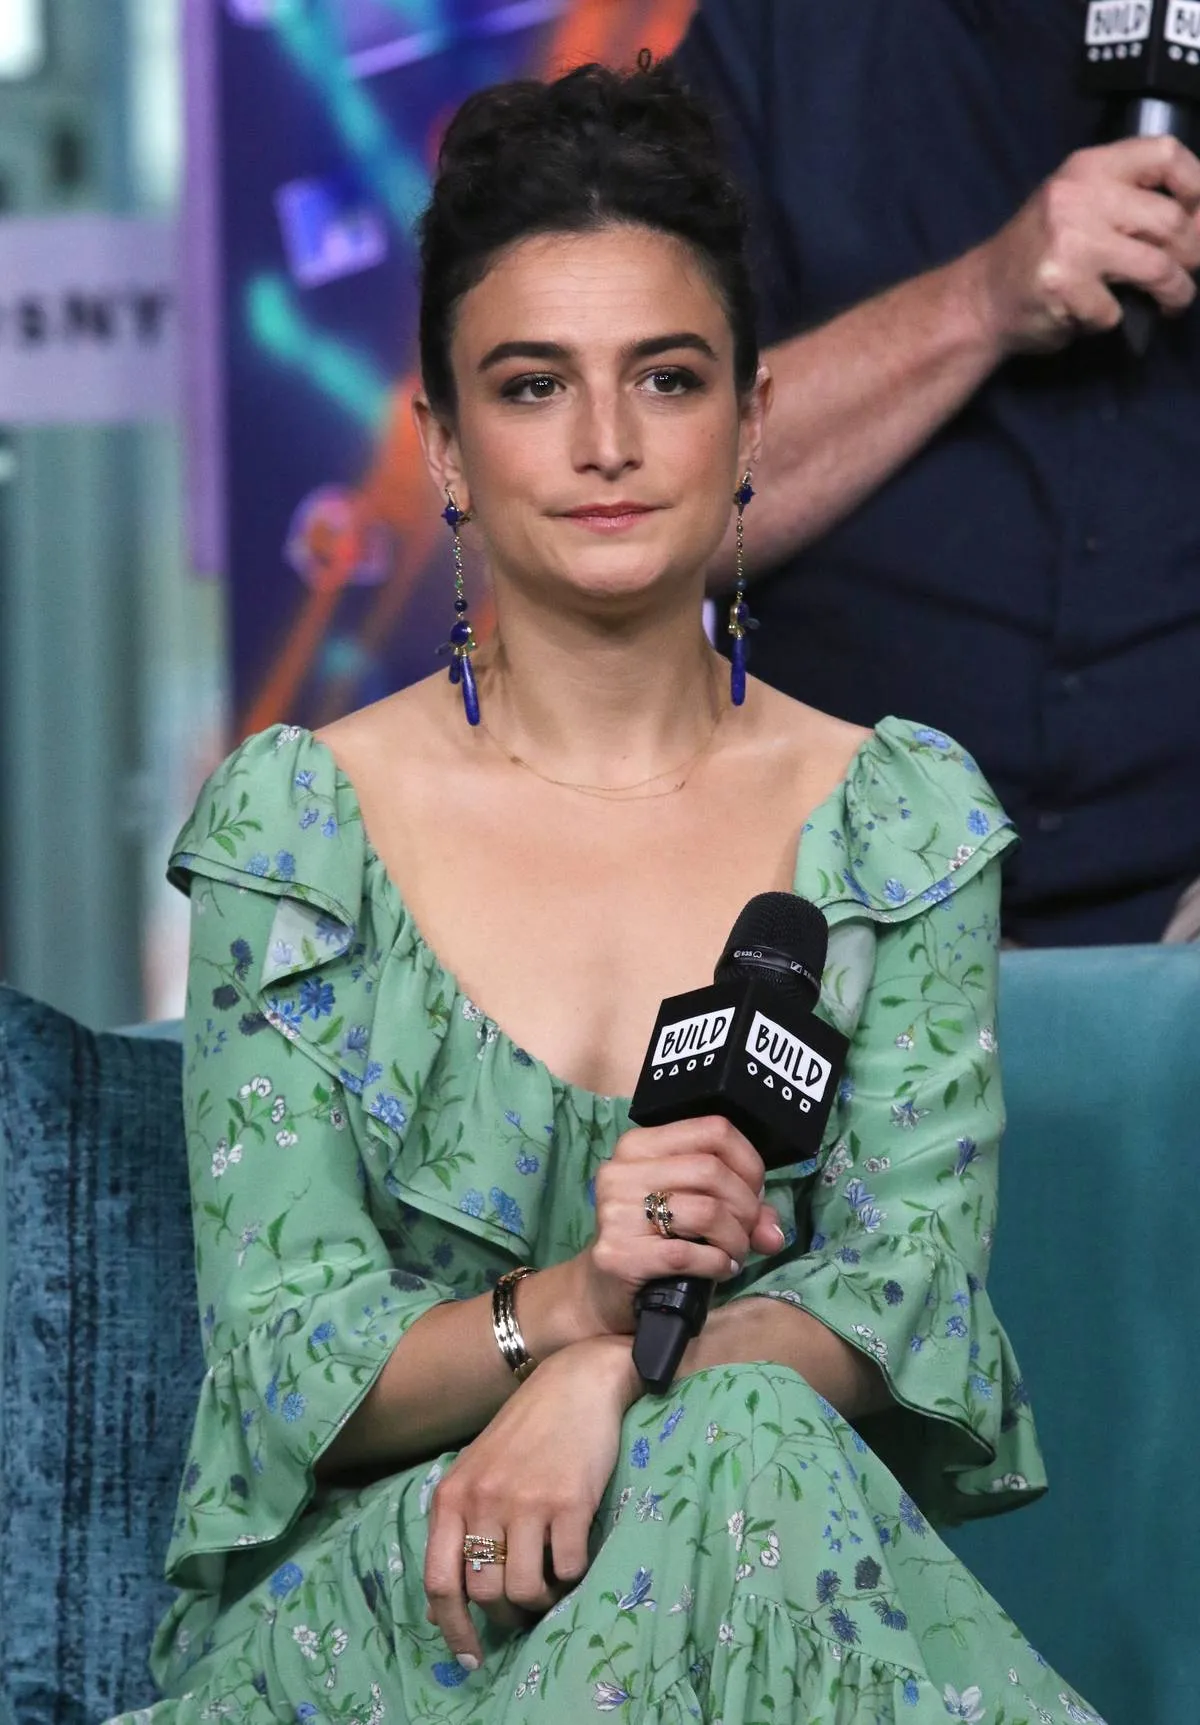 Jenny Slate Wasn't Looking For A Literal Knight In Shining Armor